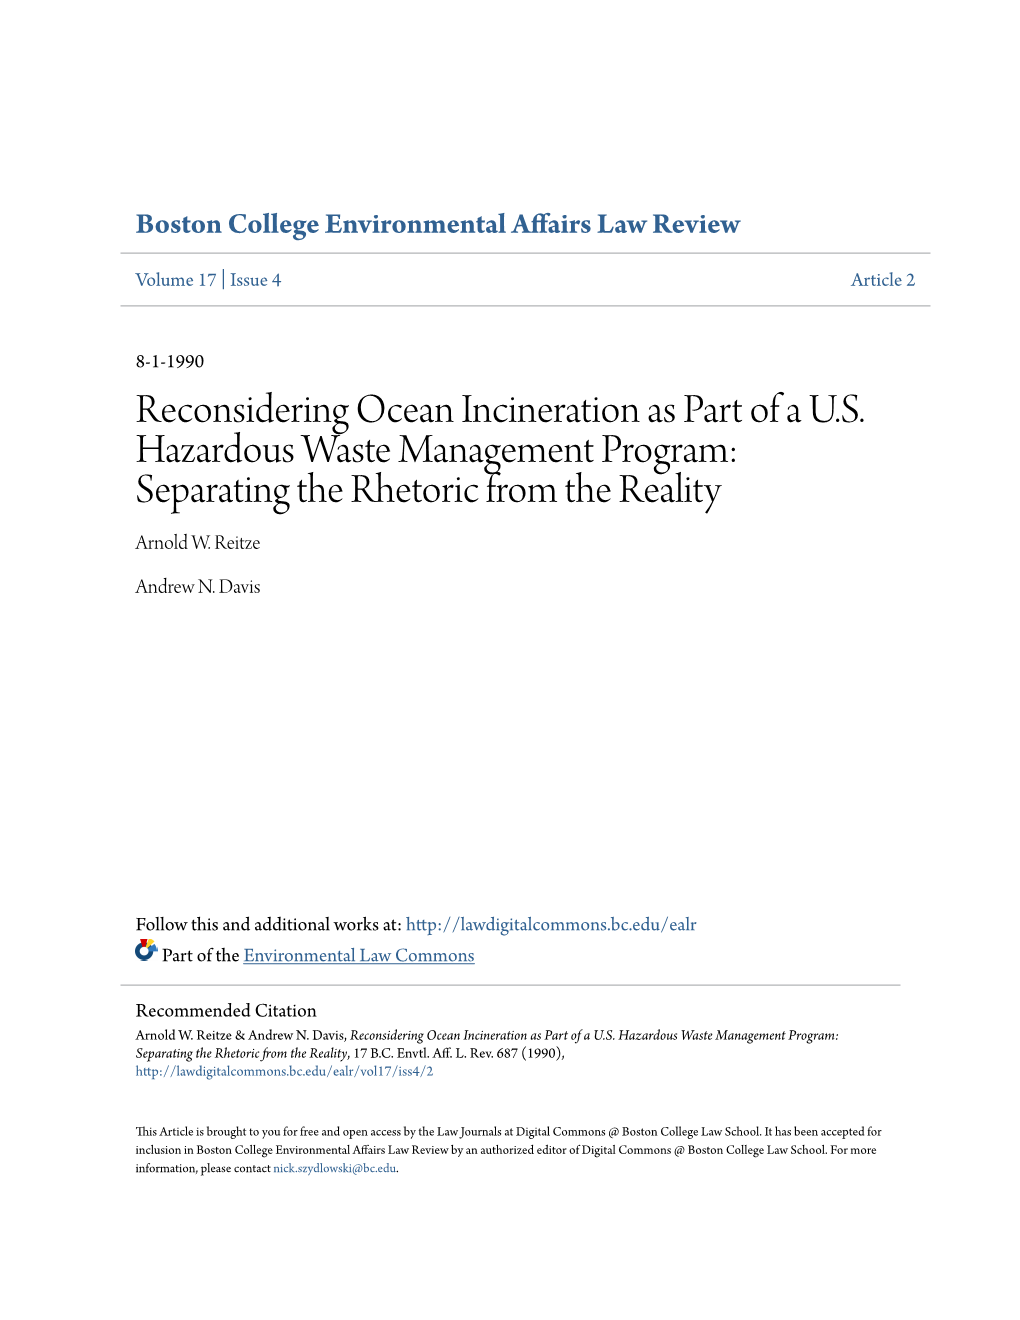 Reconsidering Ocean Incineration As Part of a U.S. Hazardous Waste Management Program: Separating the Rhetoric from the Reality Arnold W